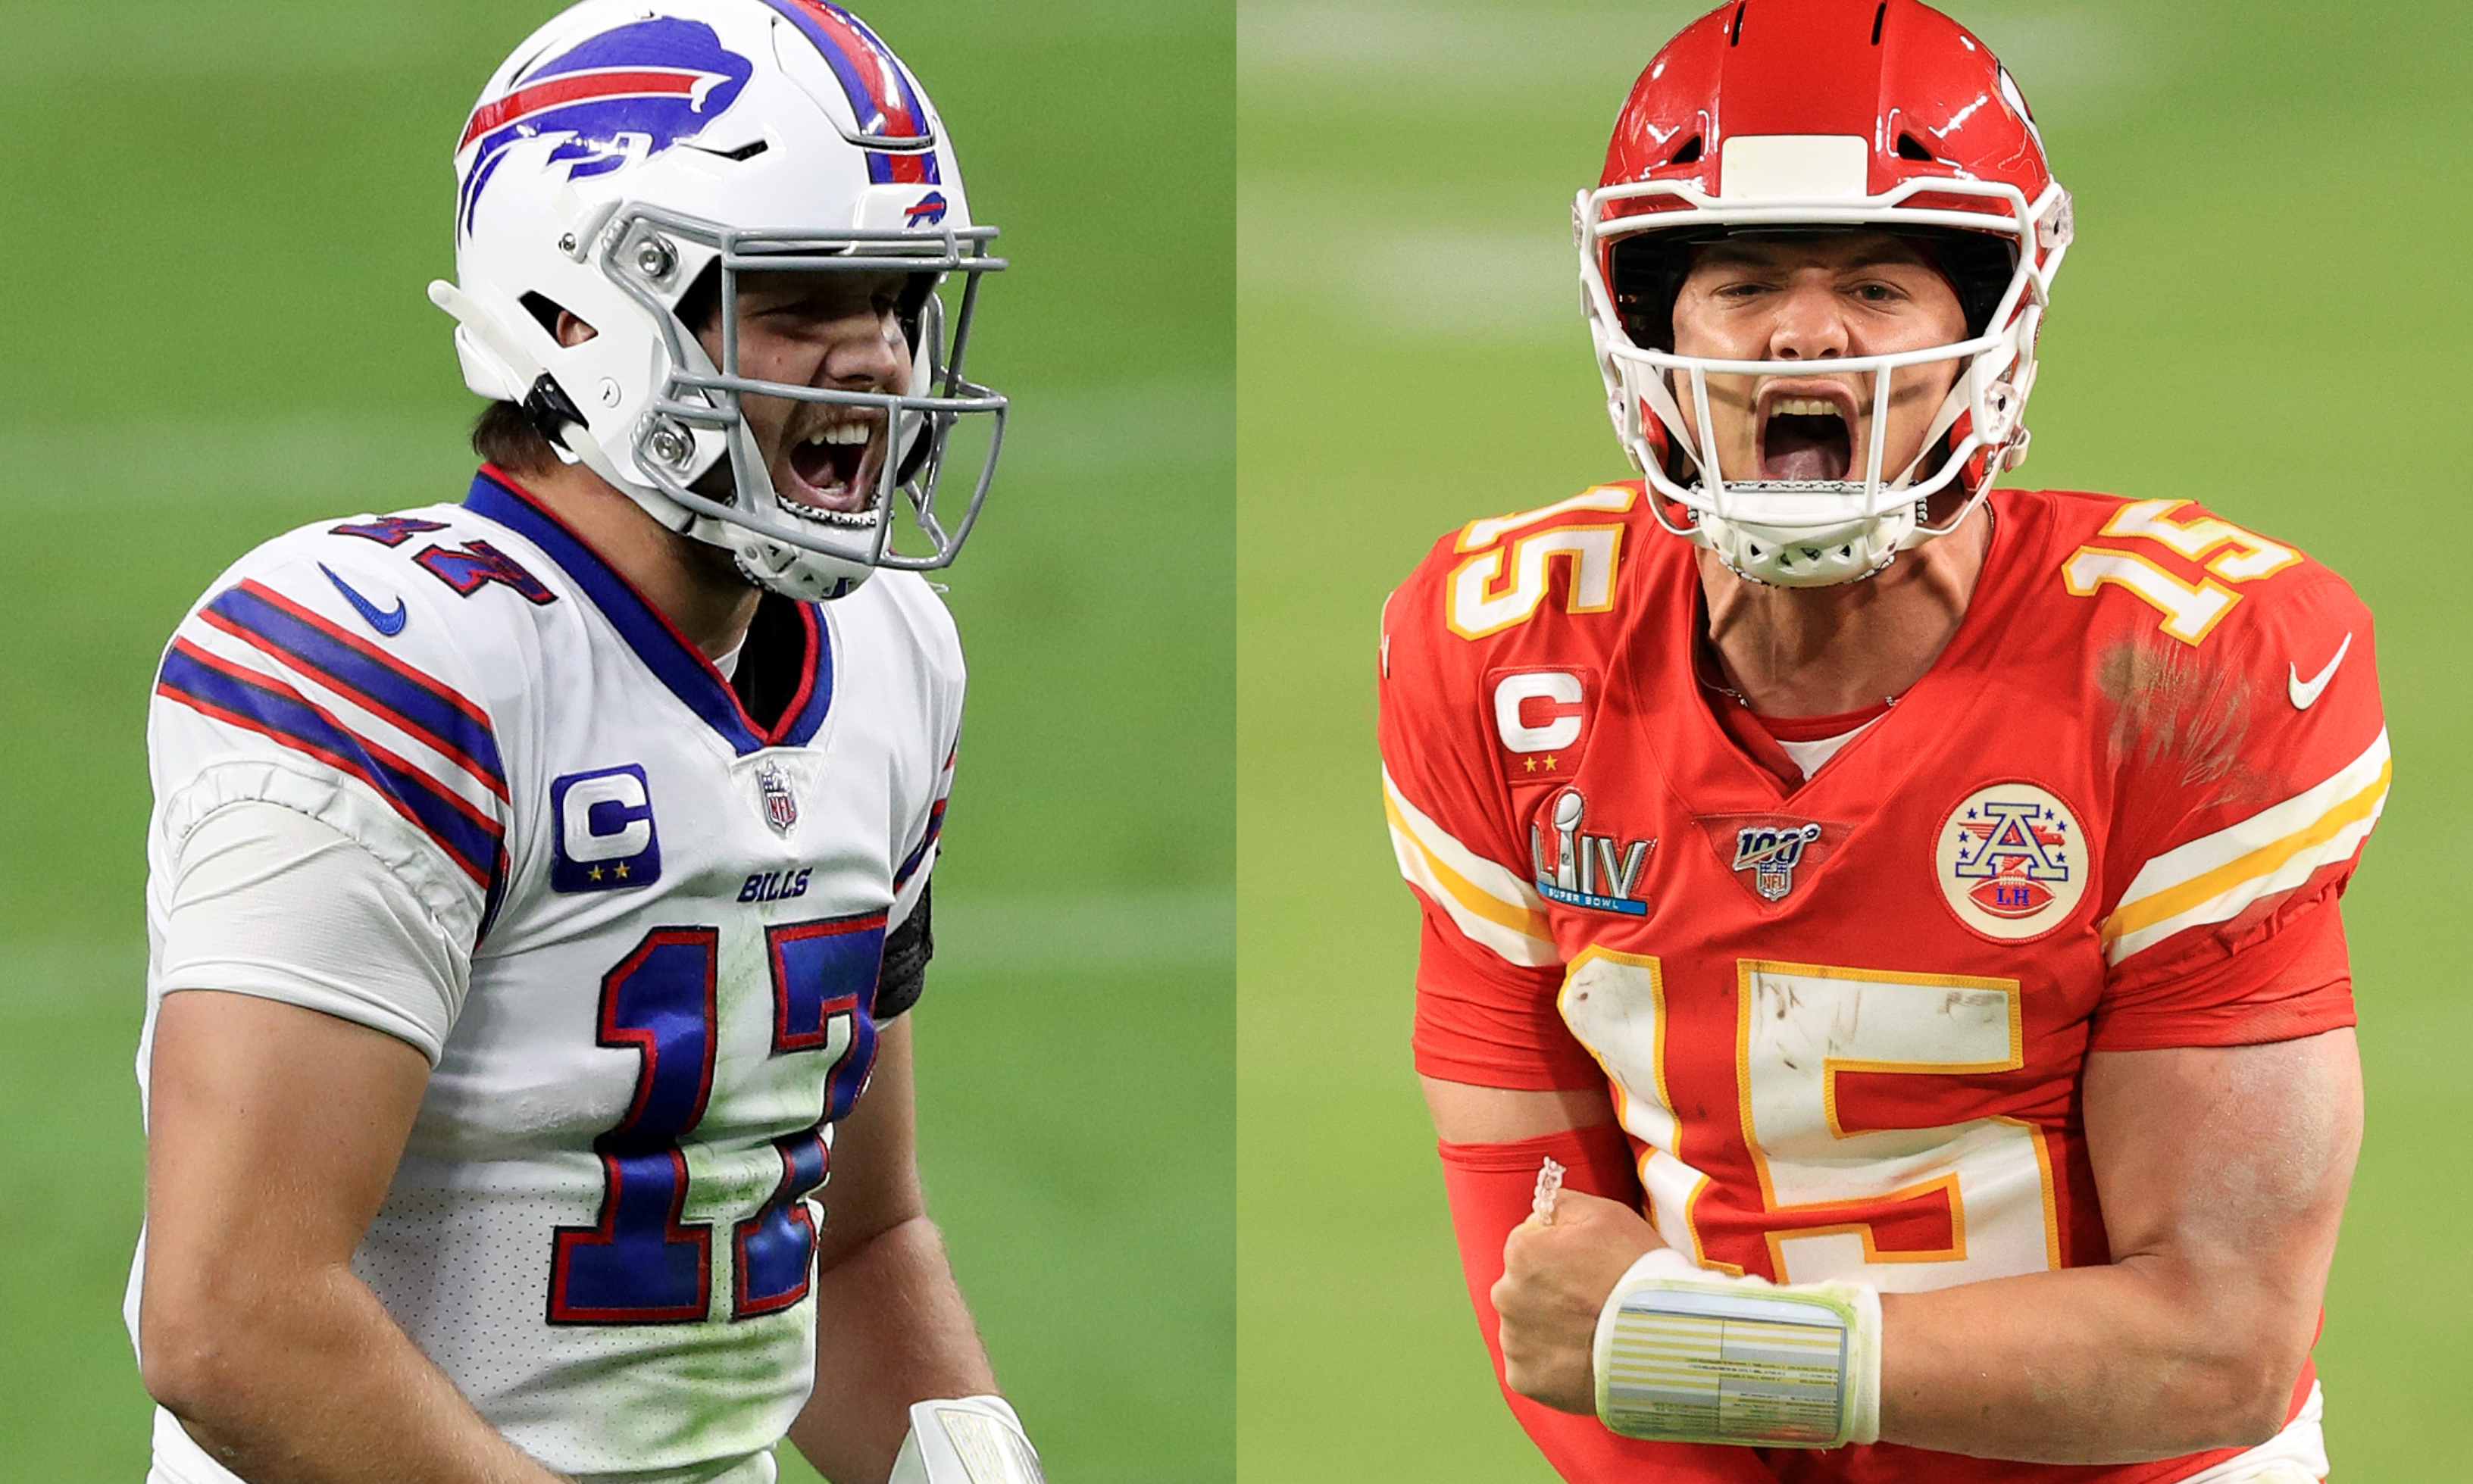 Chiefs vs. Bills: Live stream, start time, TV channel, how to